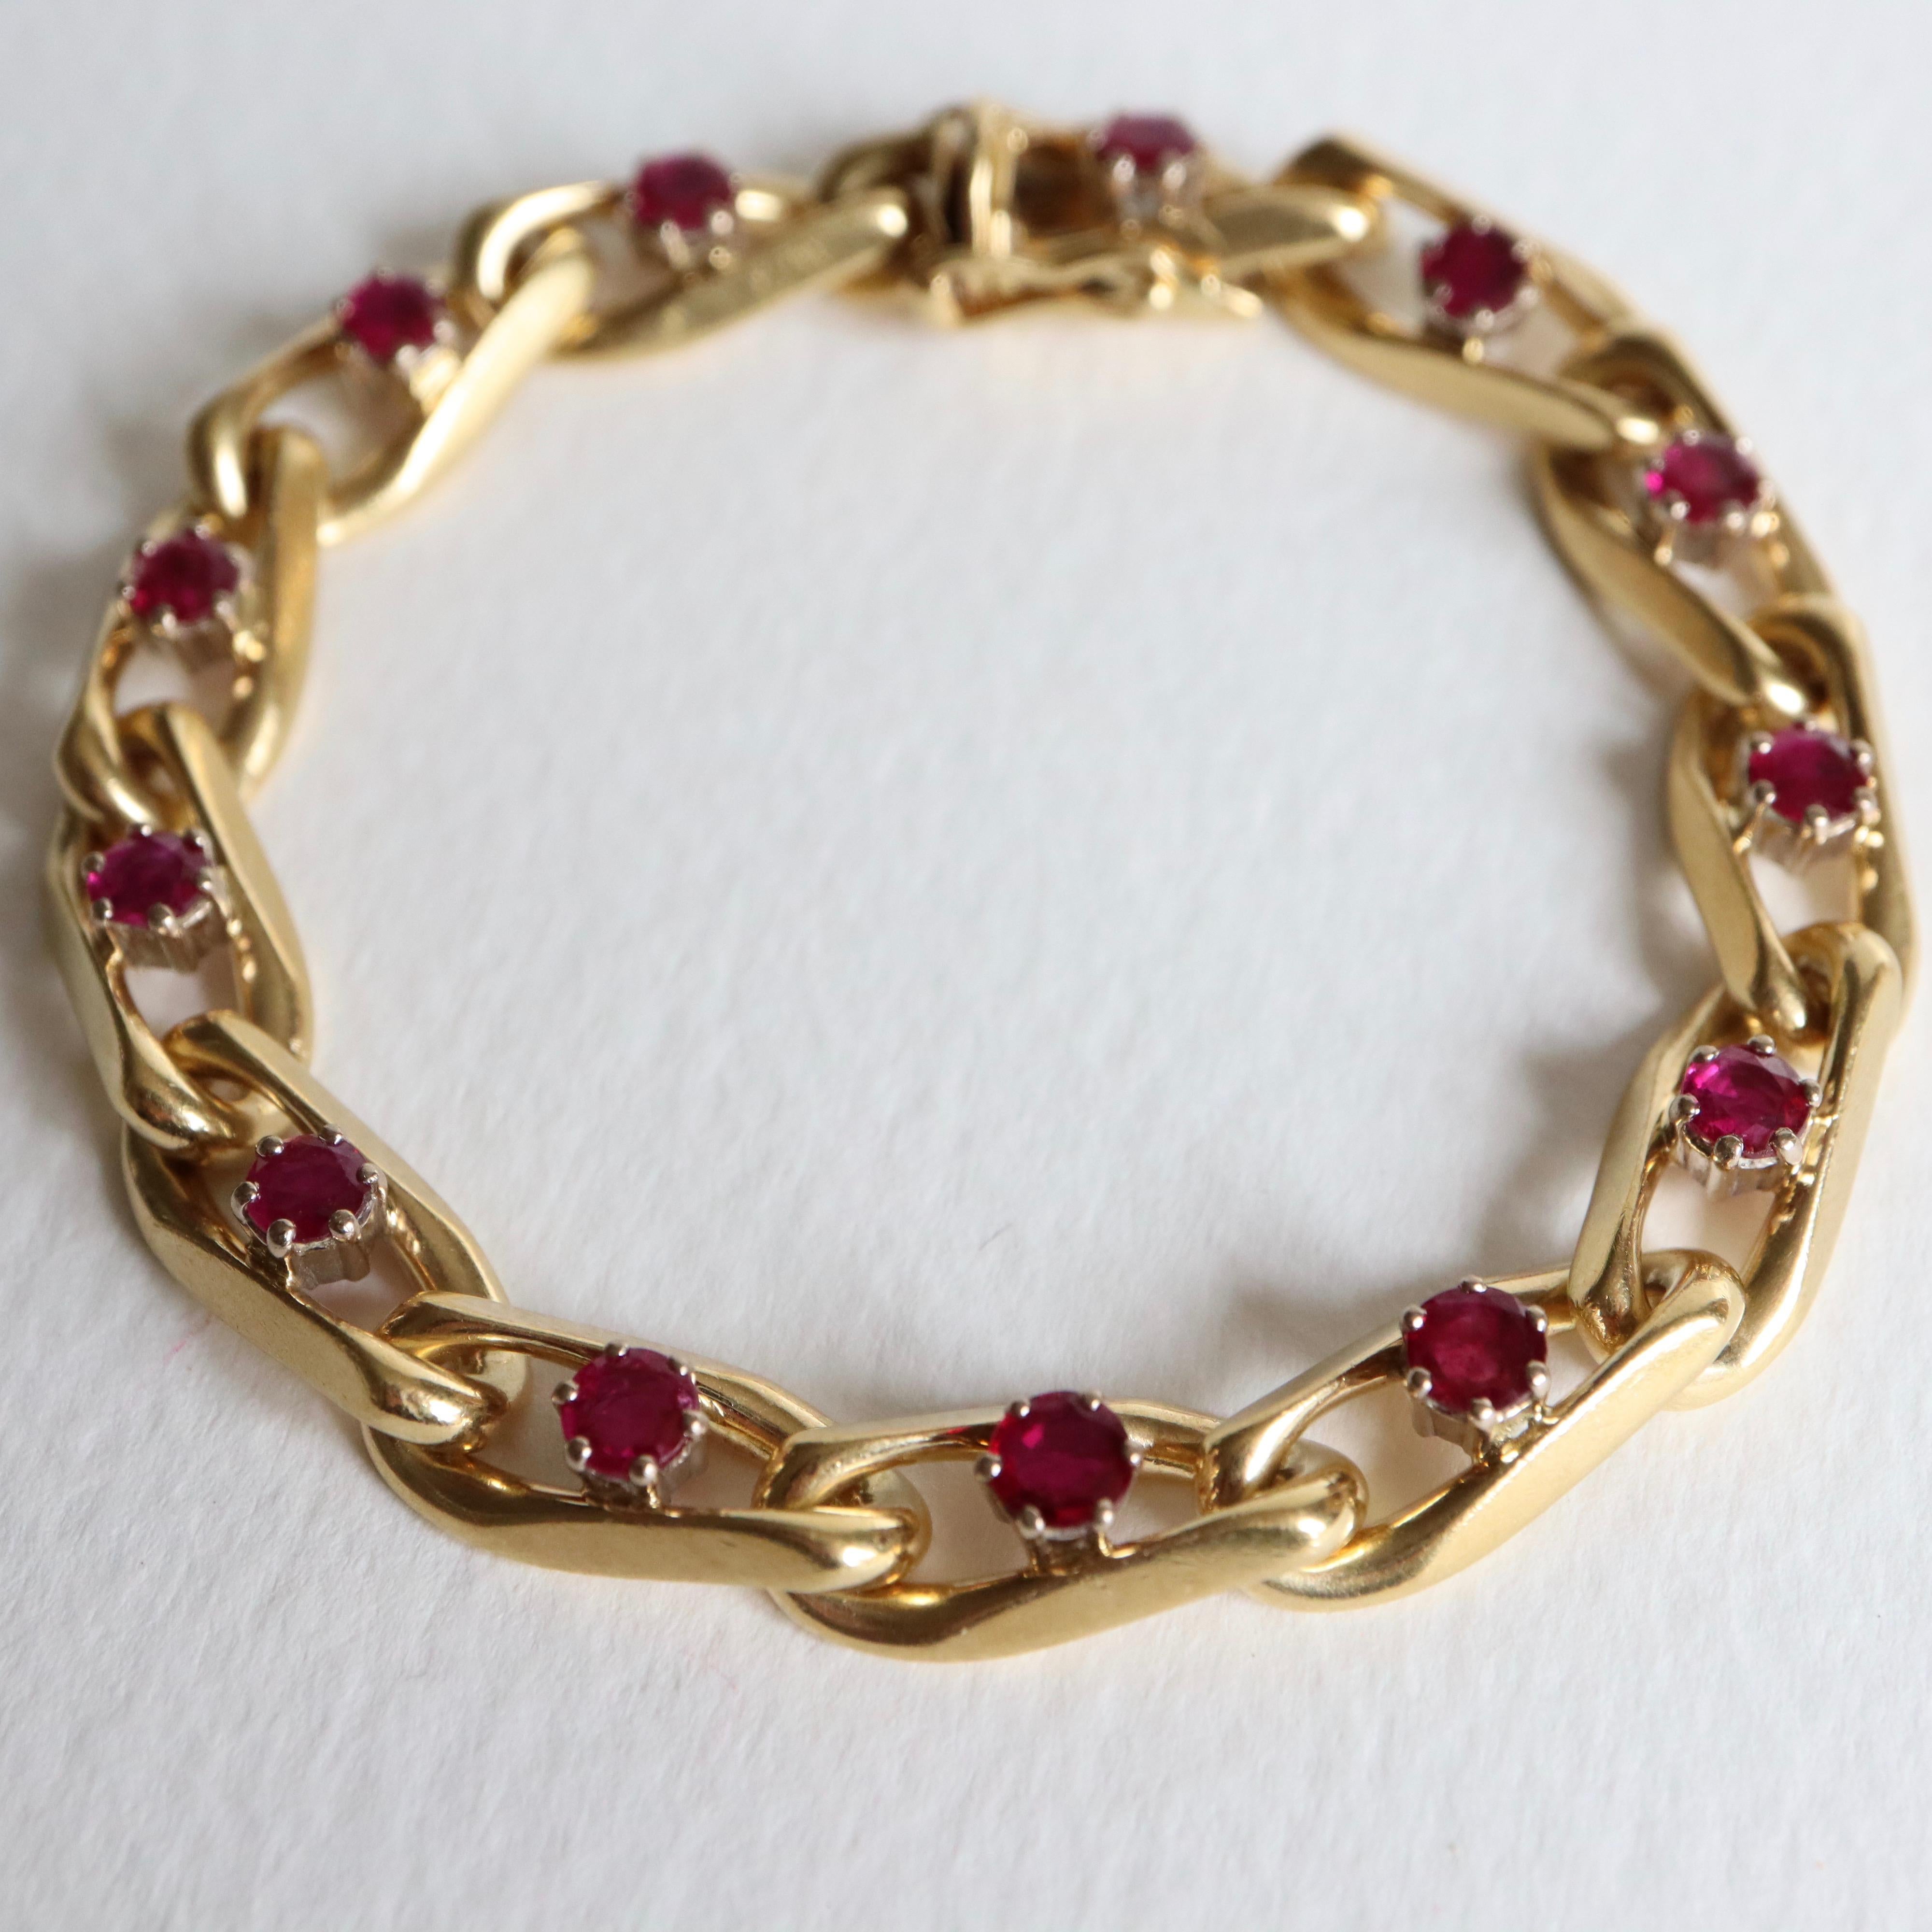 Women's or Men's Chaumet 18 Karat Yellow Gold and Ruby Bracelet For Sale